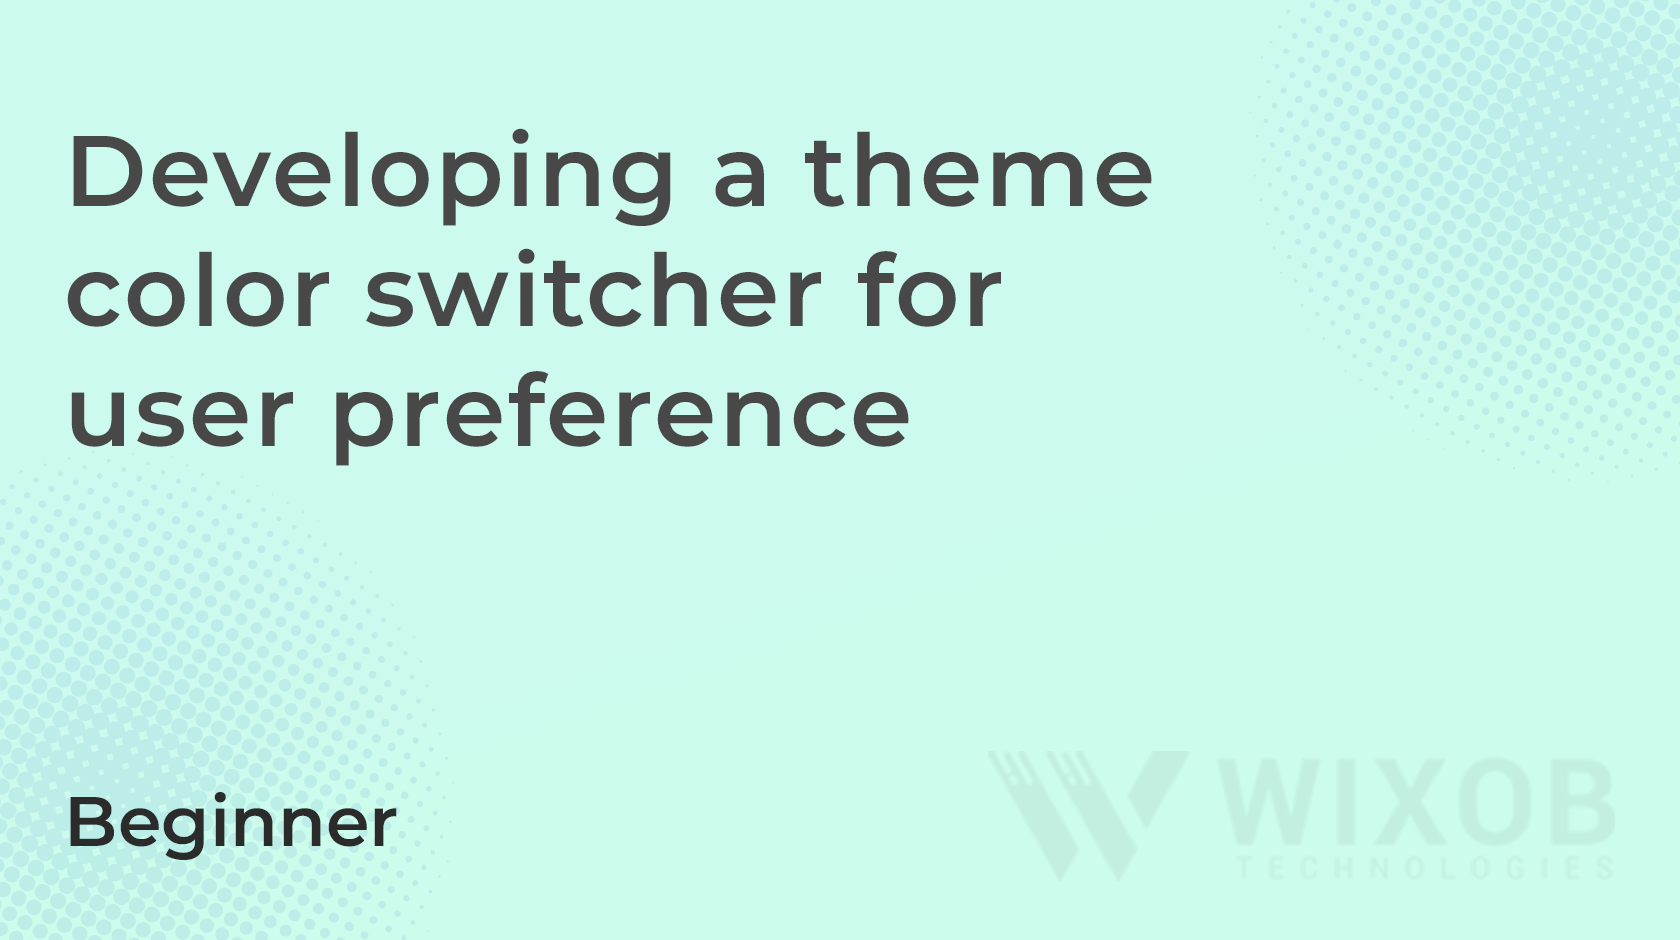 Developing a theme color switcher for user preference